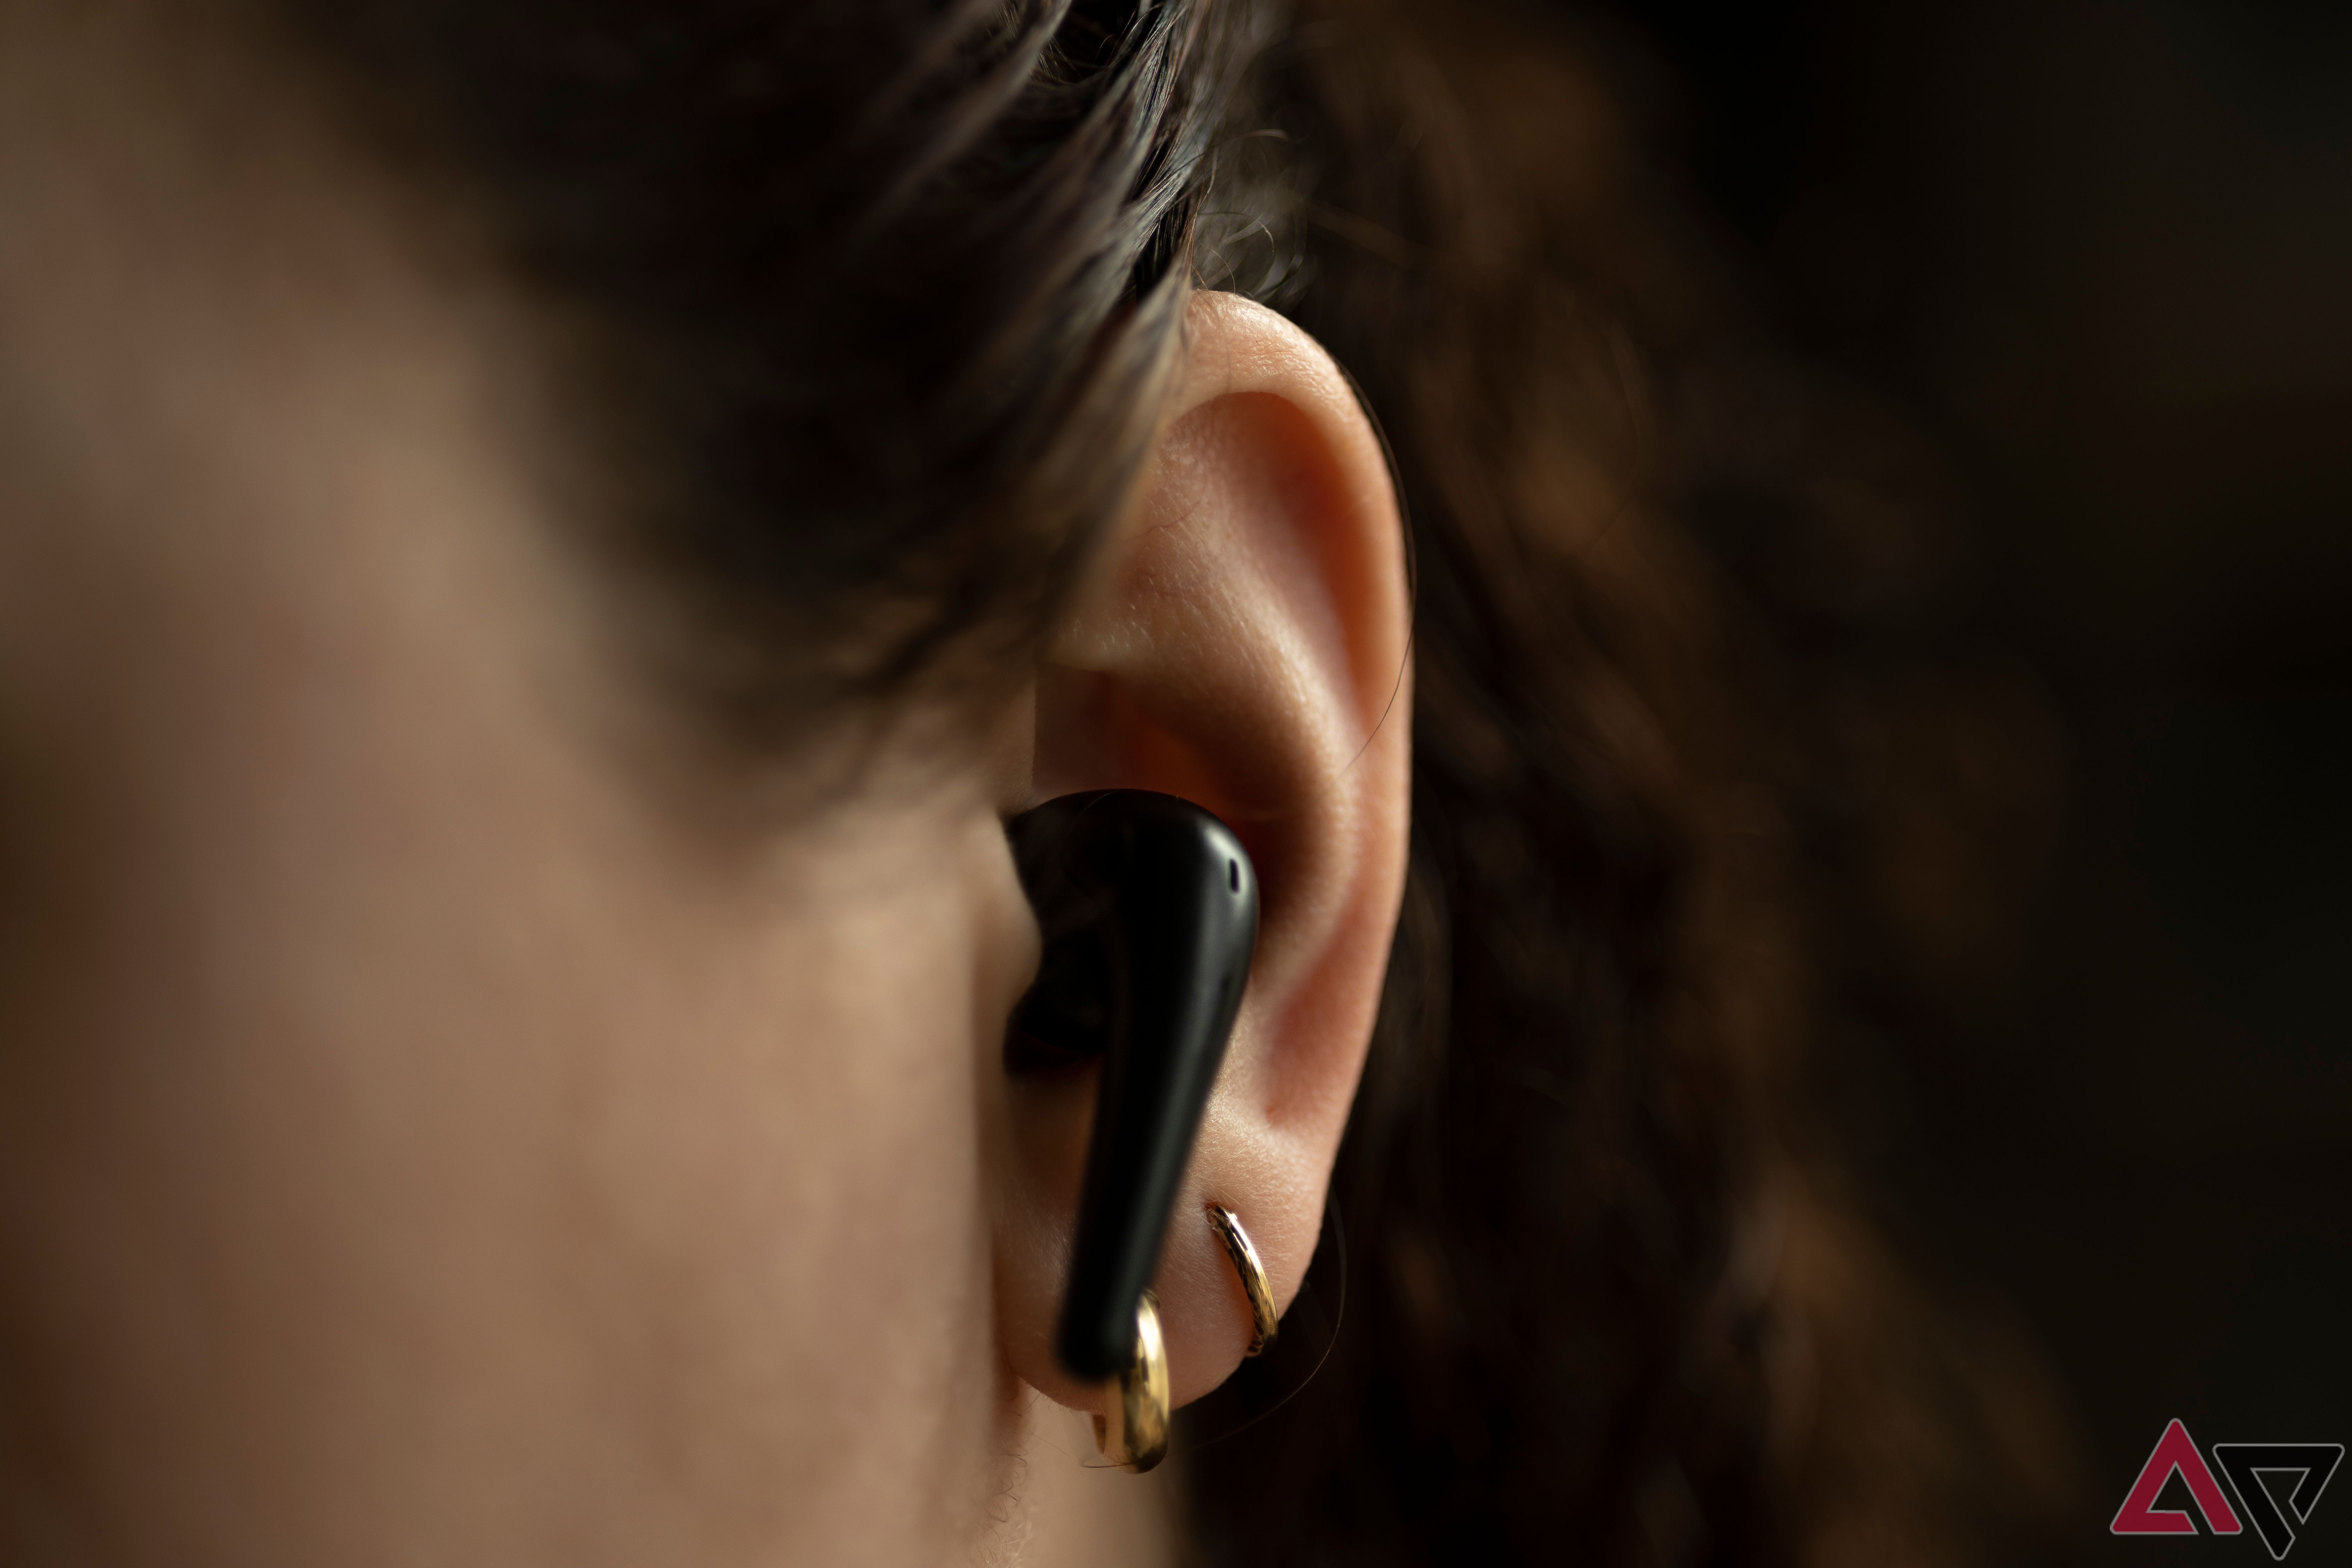 Close up of 1More Aero earbud in woman's ear